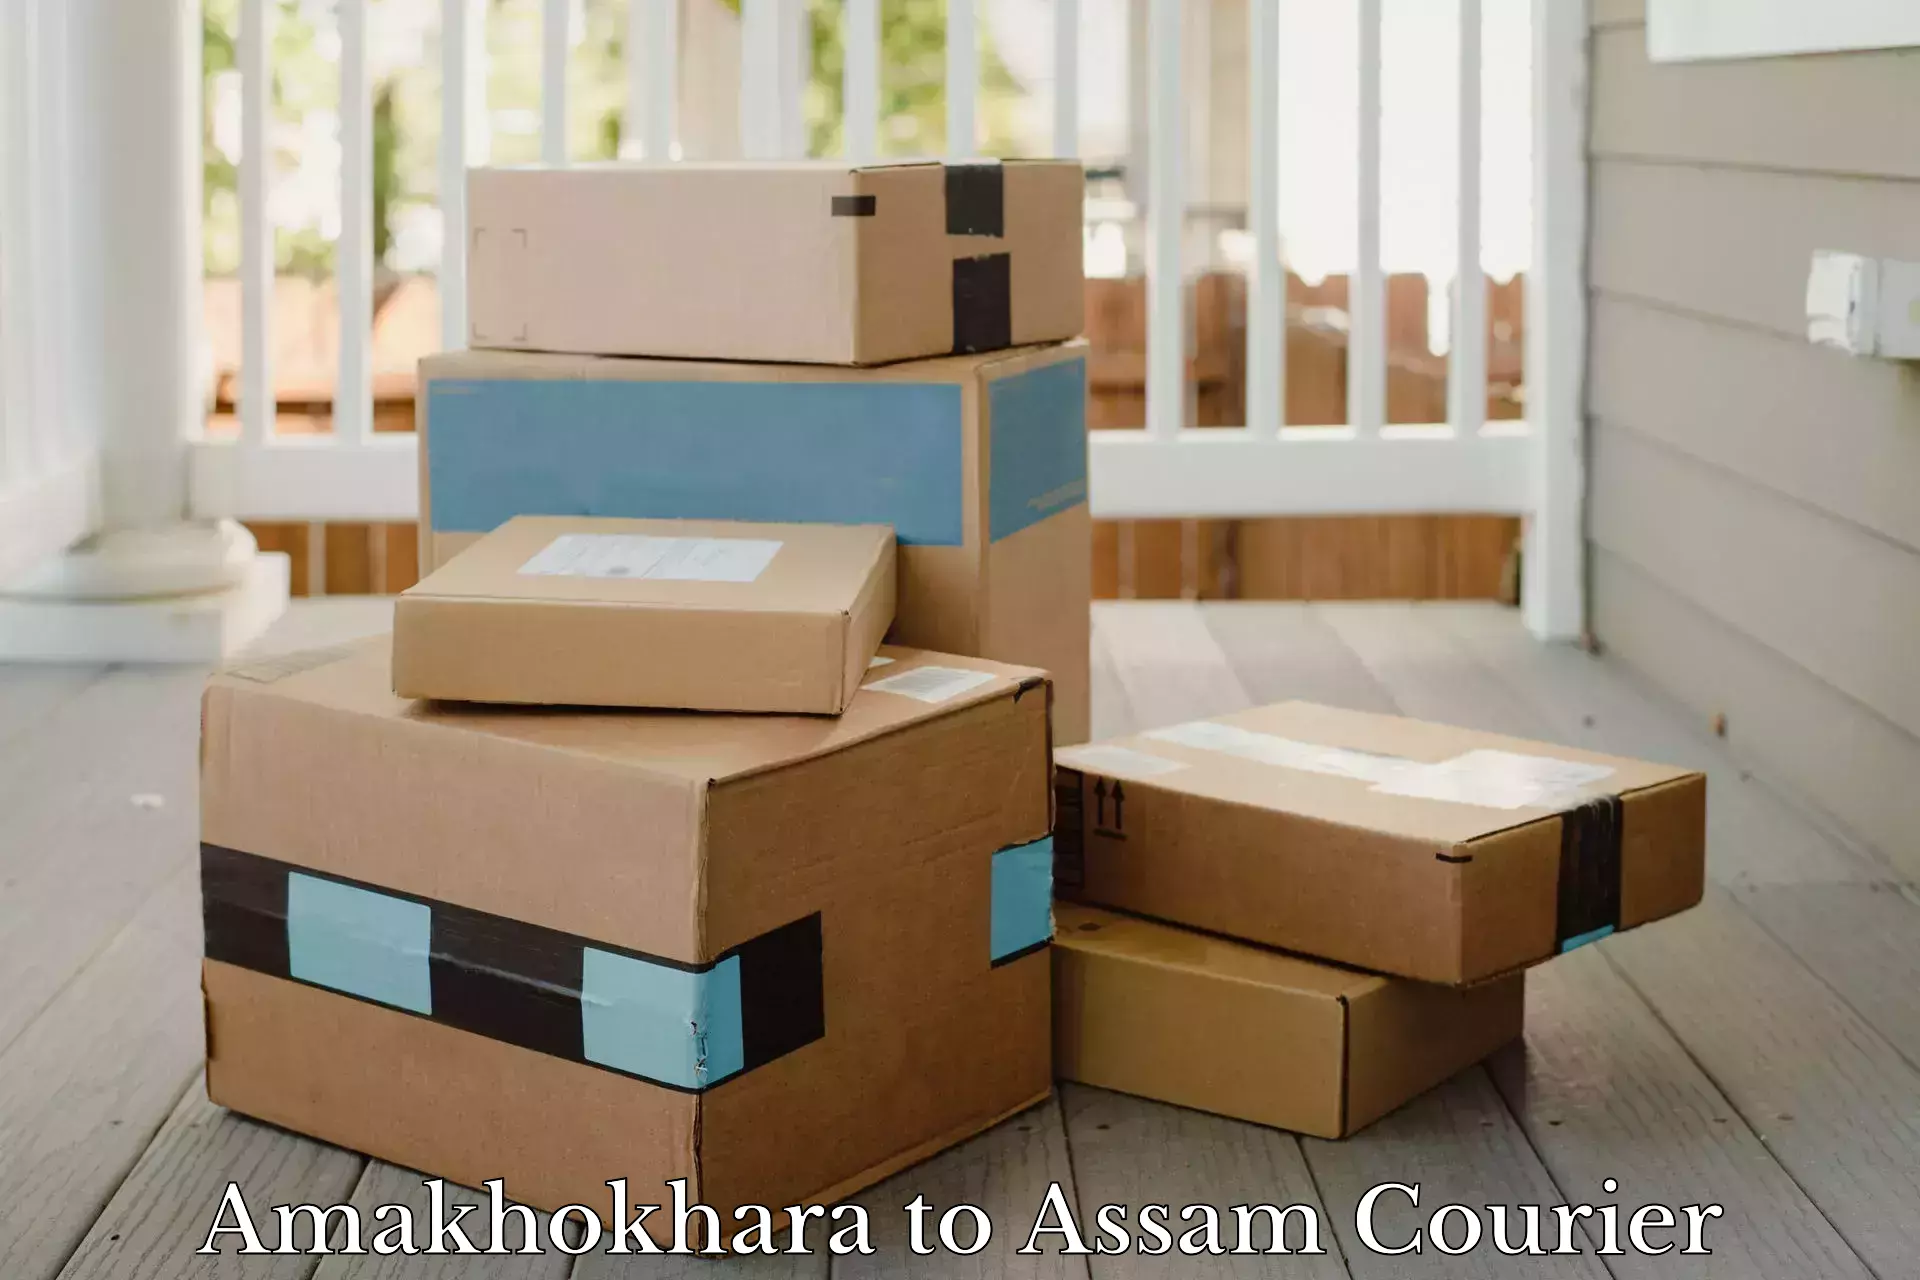 Package tracking in Amakhokhara to Lala Assam